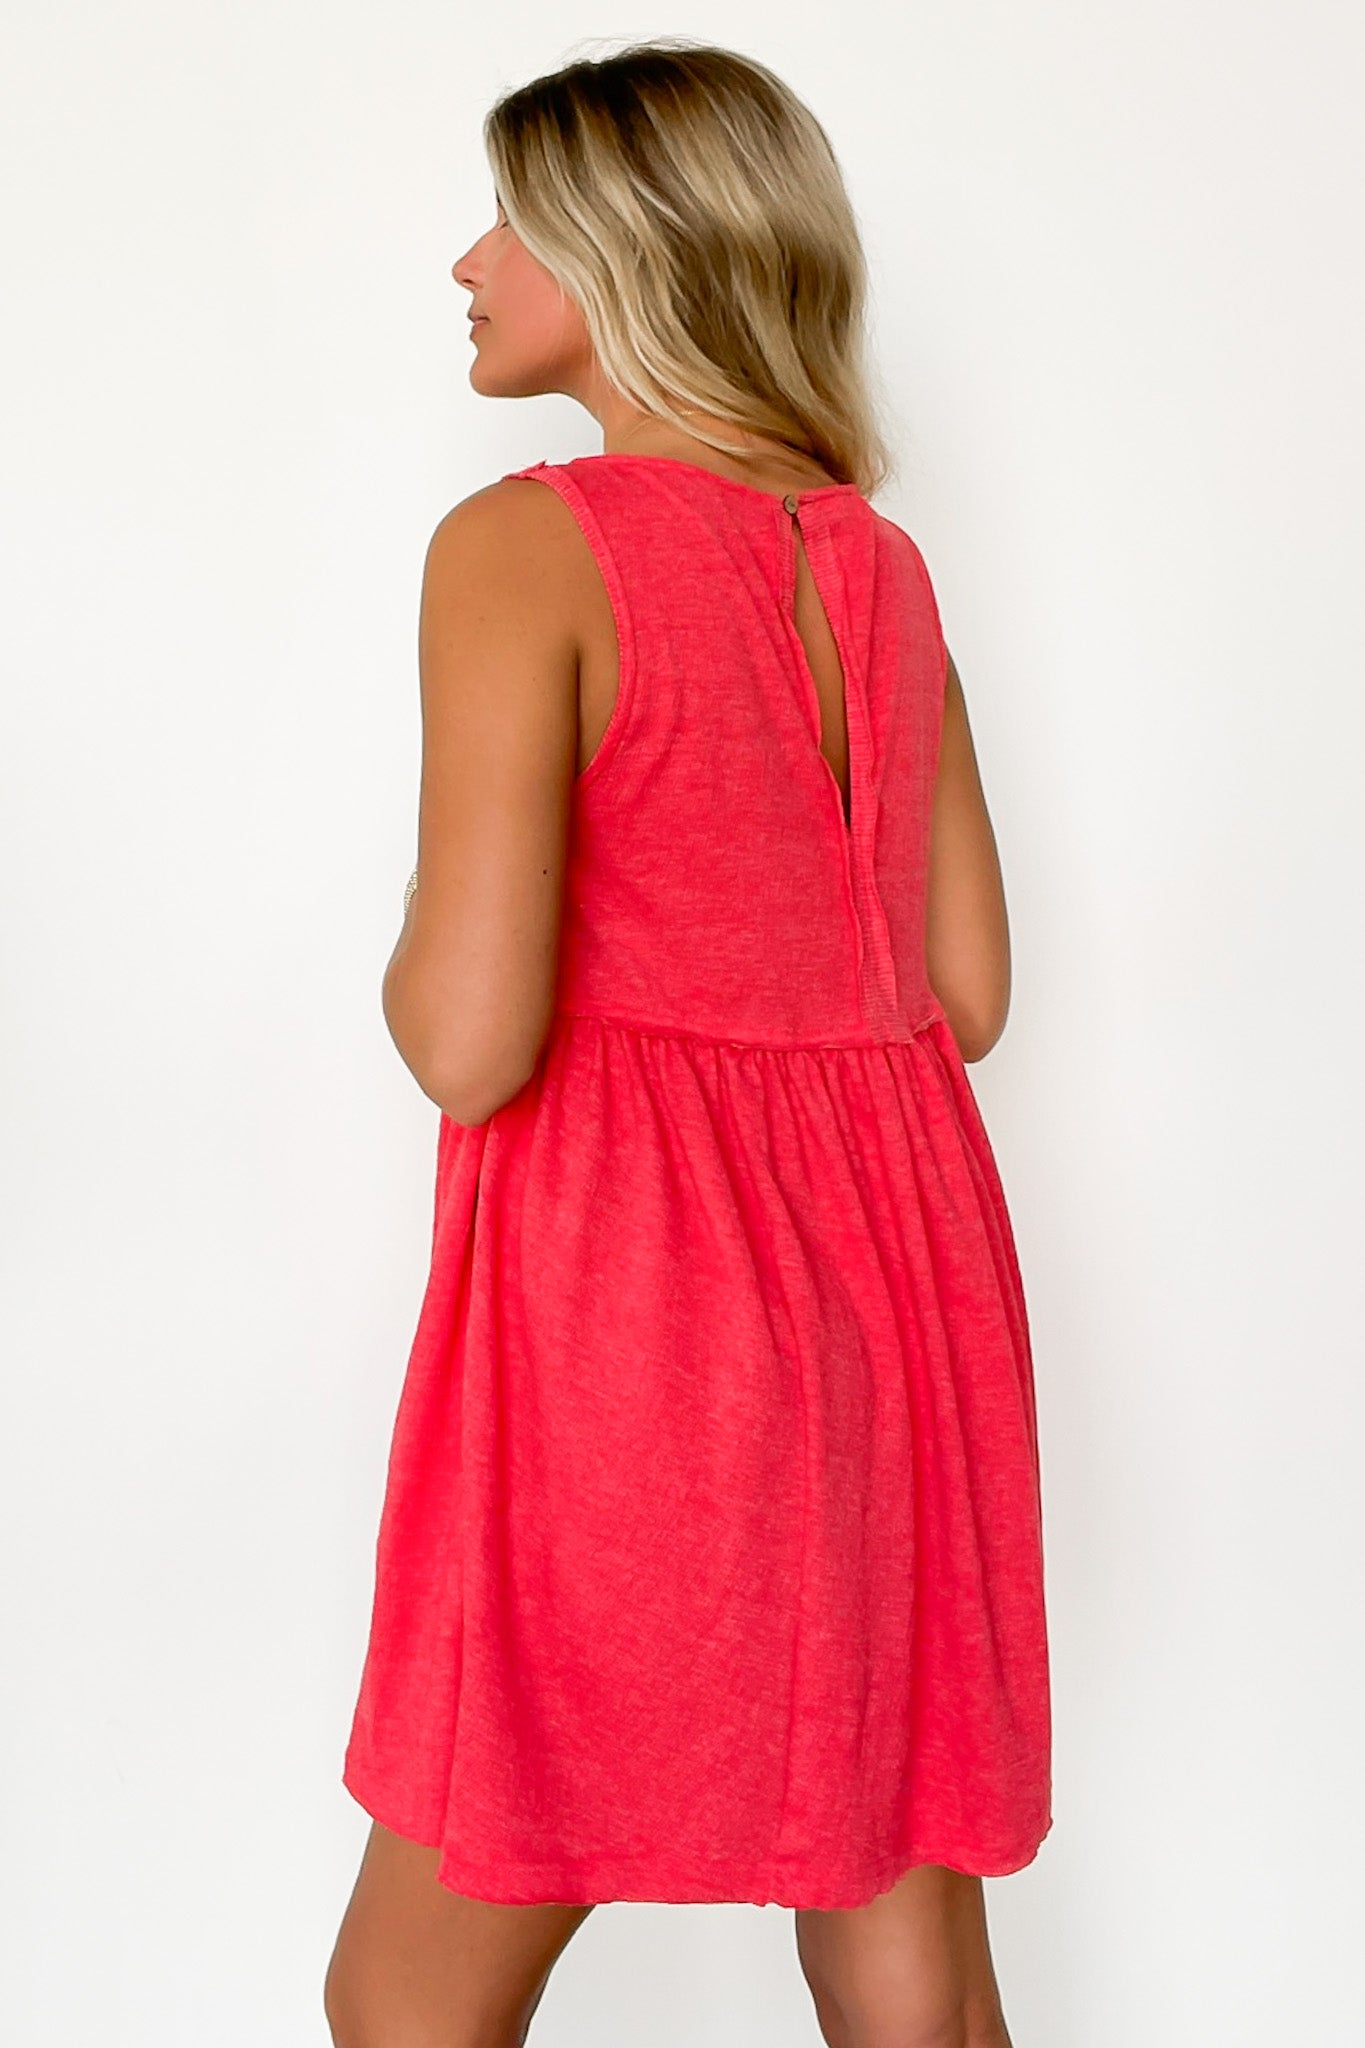  Torie Flowy Babydoll Dress - Madison and Mallory